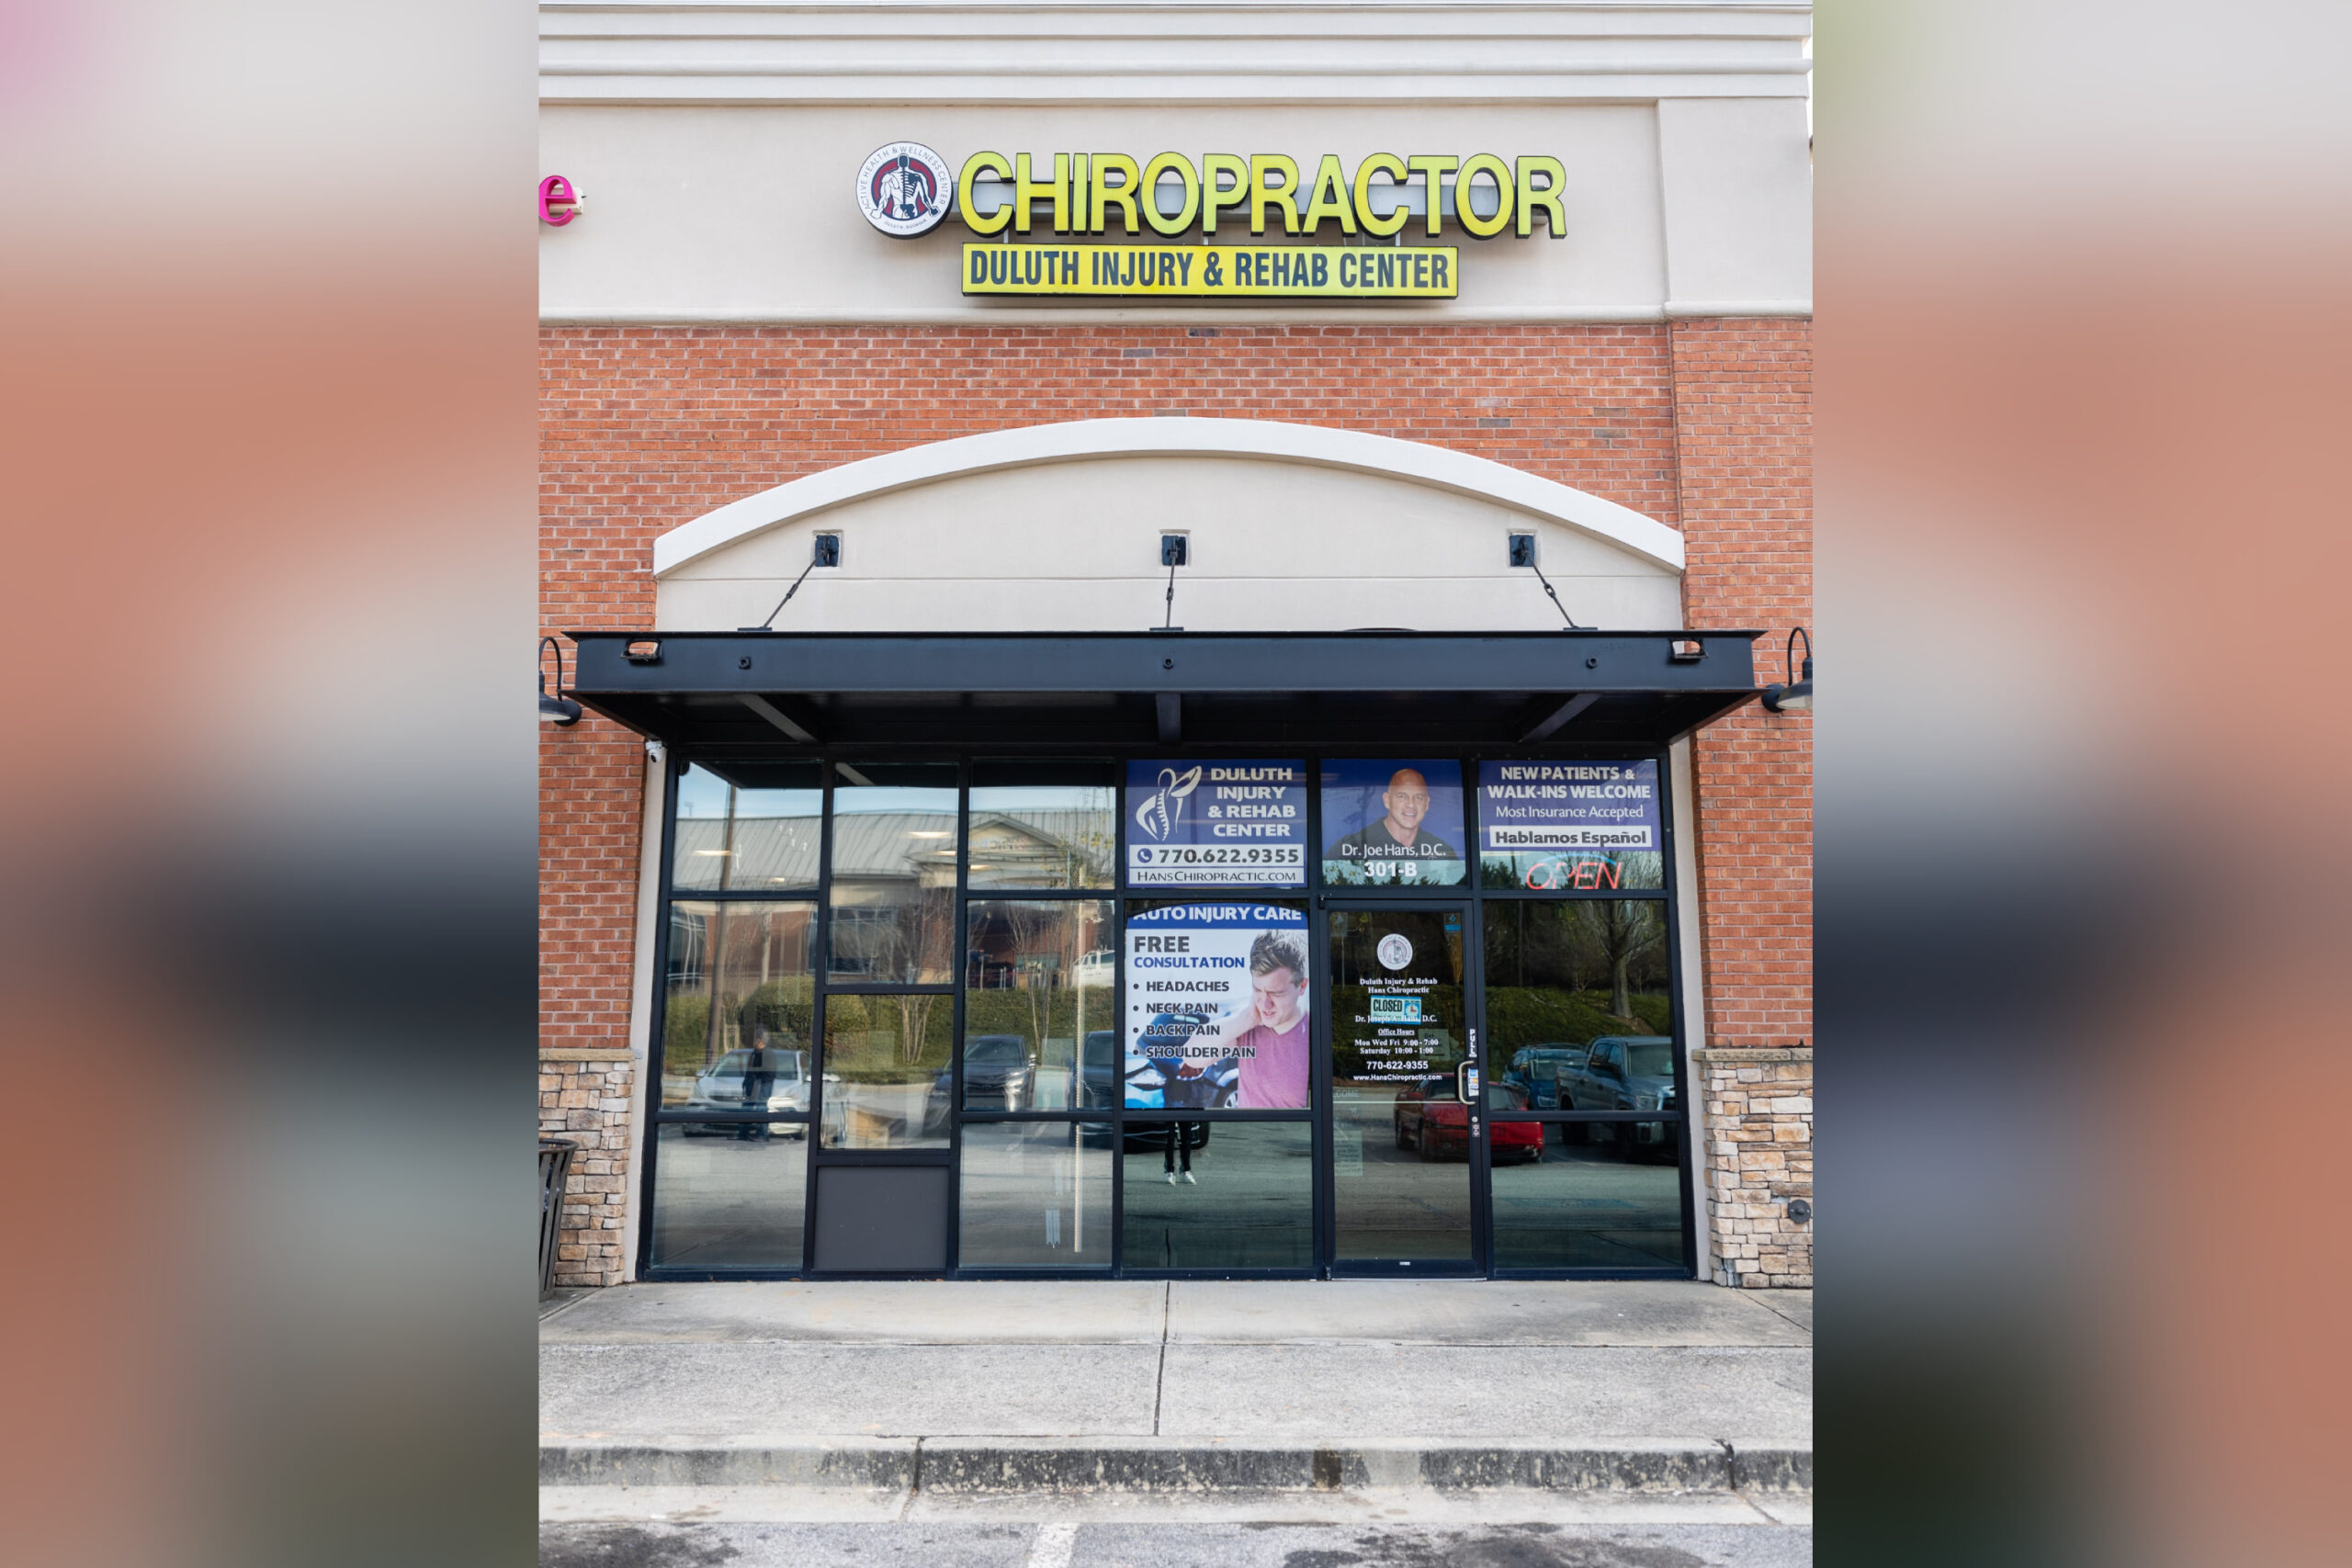 Entrance of a chiropractic clinic with signage and advertisement banners.